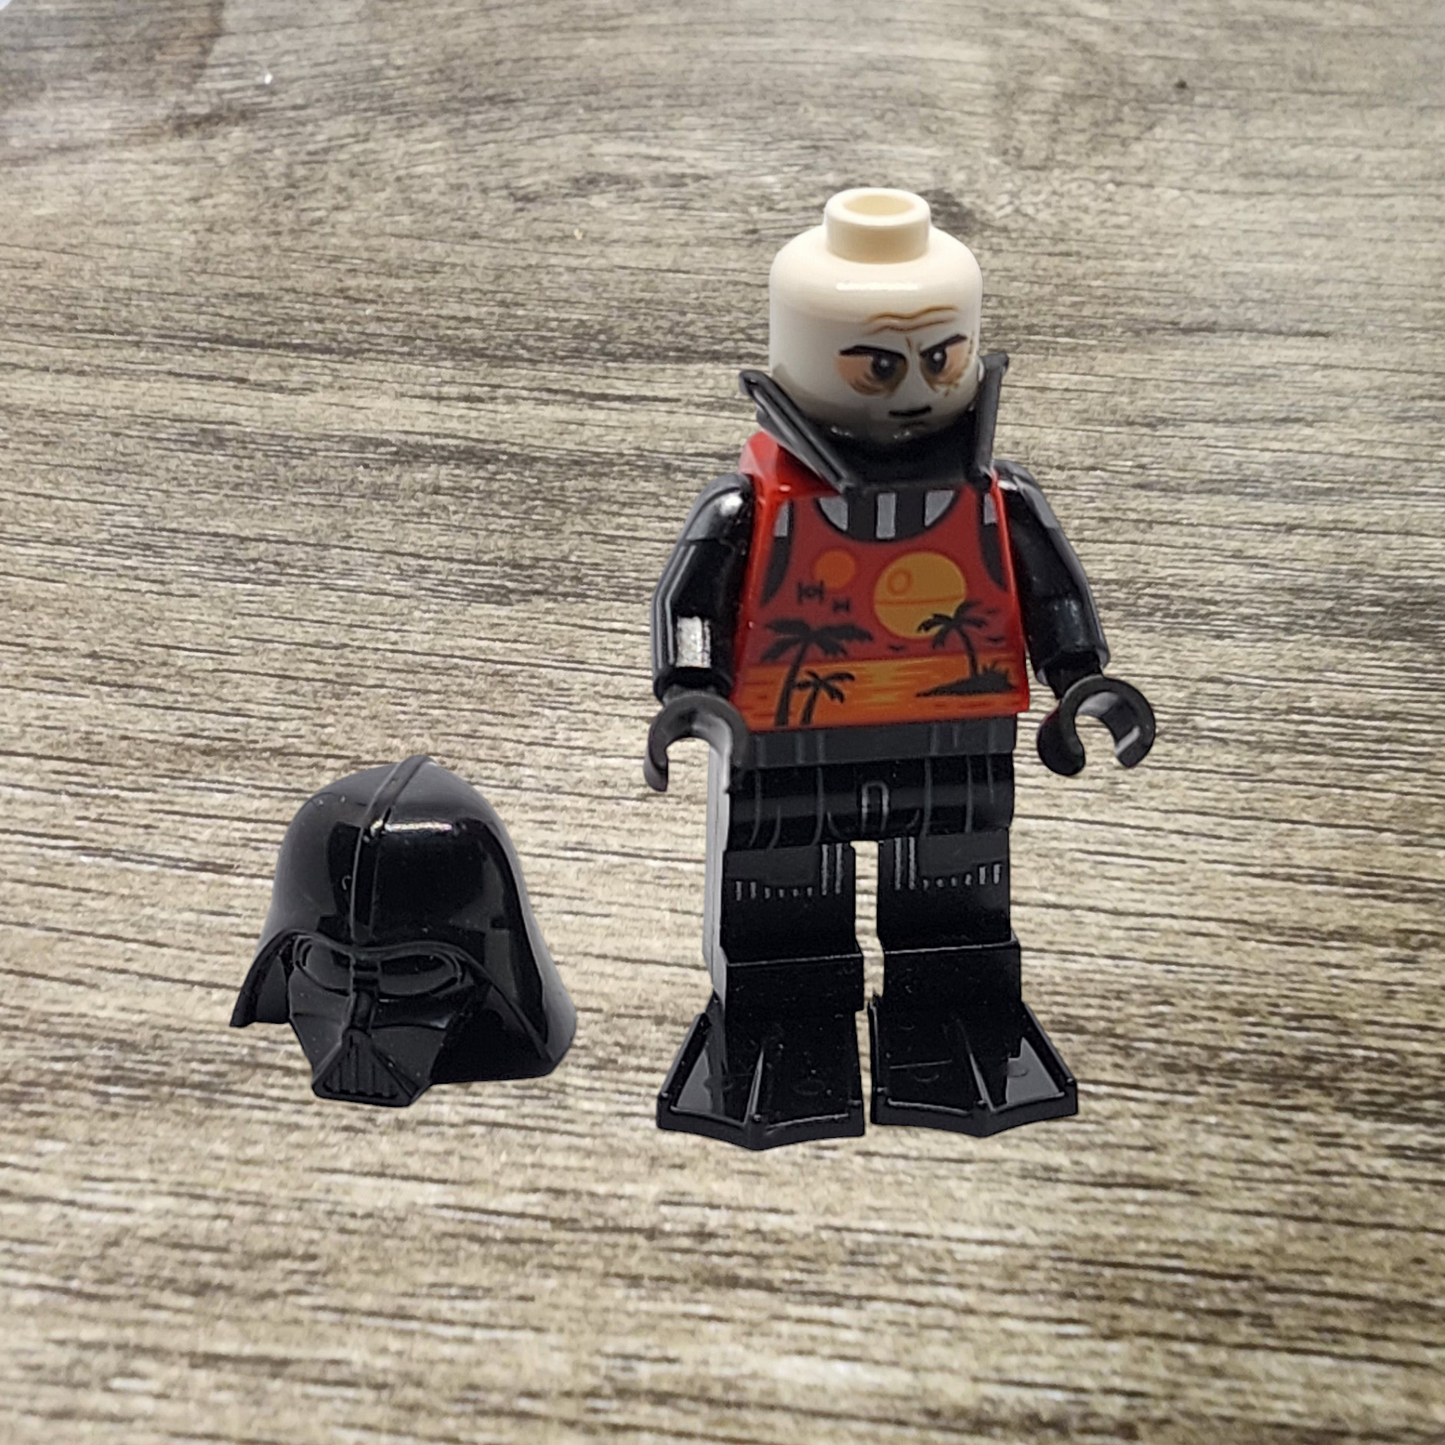 Darth Vader Summer Outfit sw1239 Minifigure Lego Star Wars